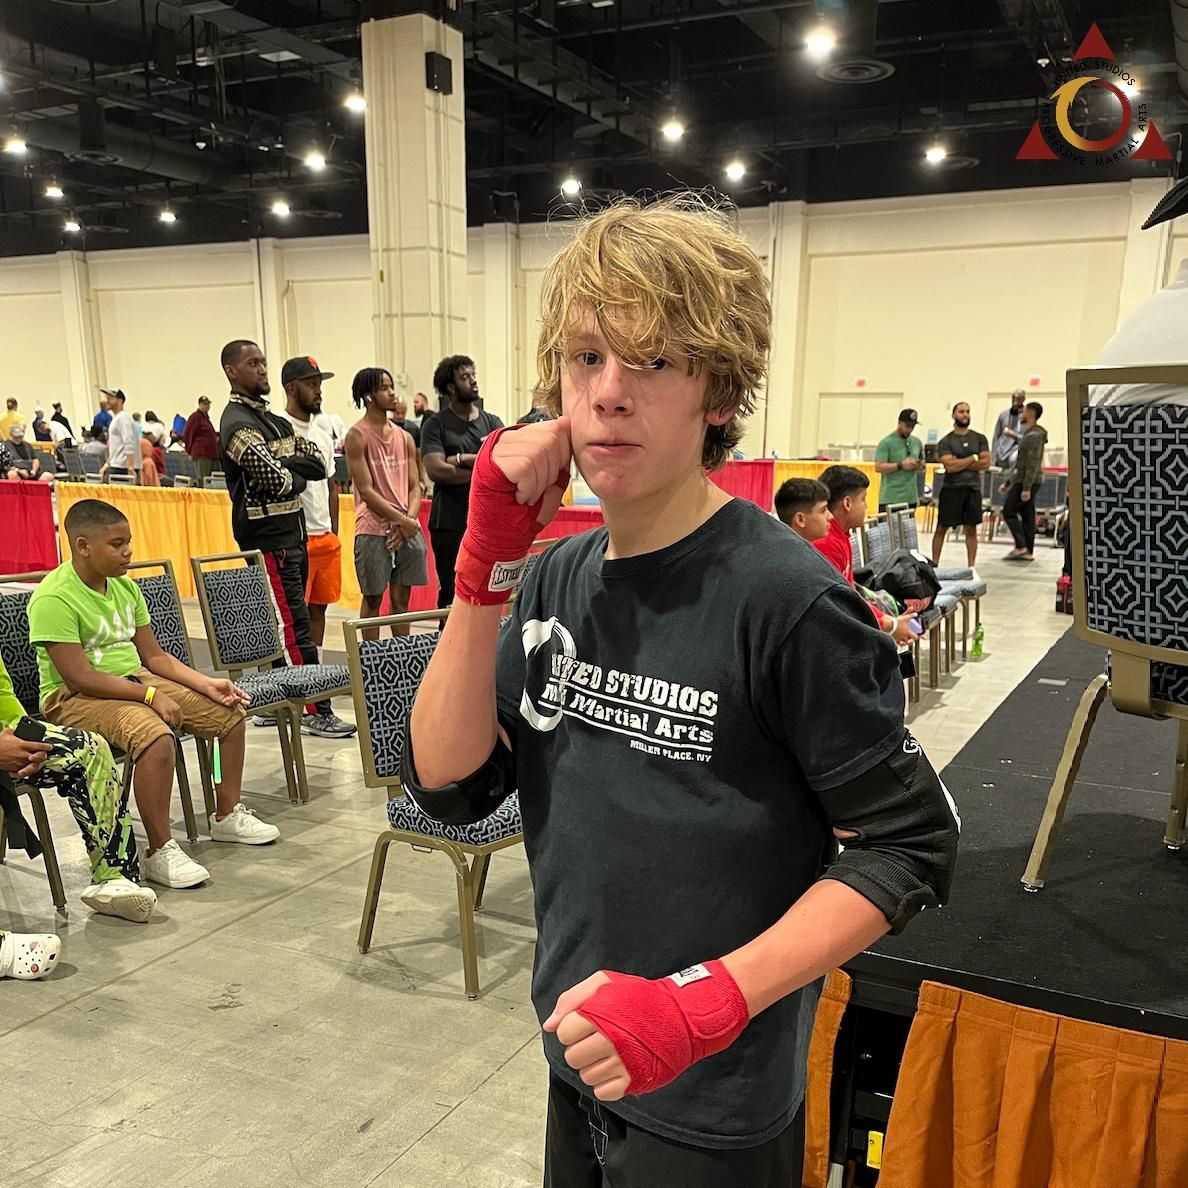 A young man wearing boxing gloves and a black shirt with the word studios on it